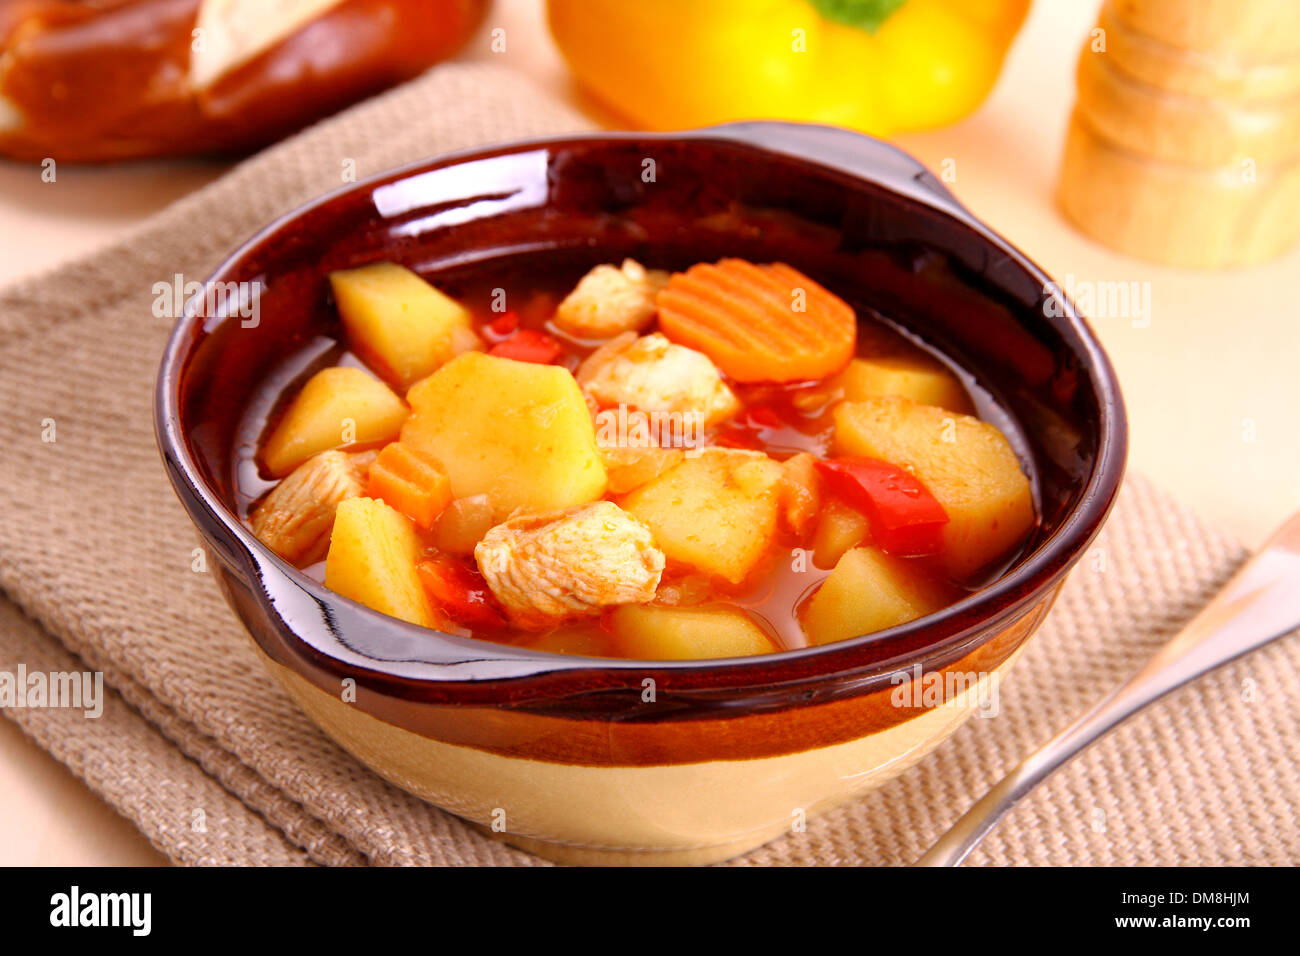 Vegetable stew with chicken and potato, close up Stock Photo